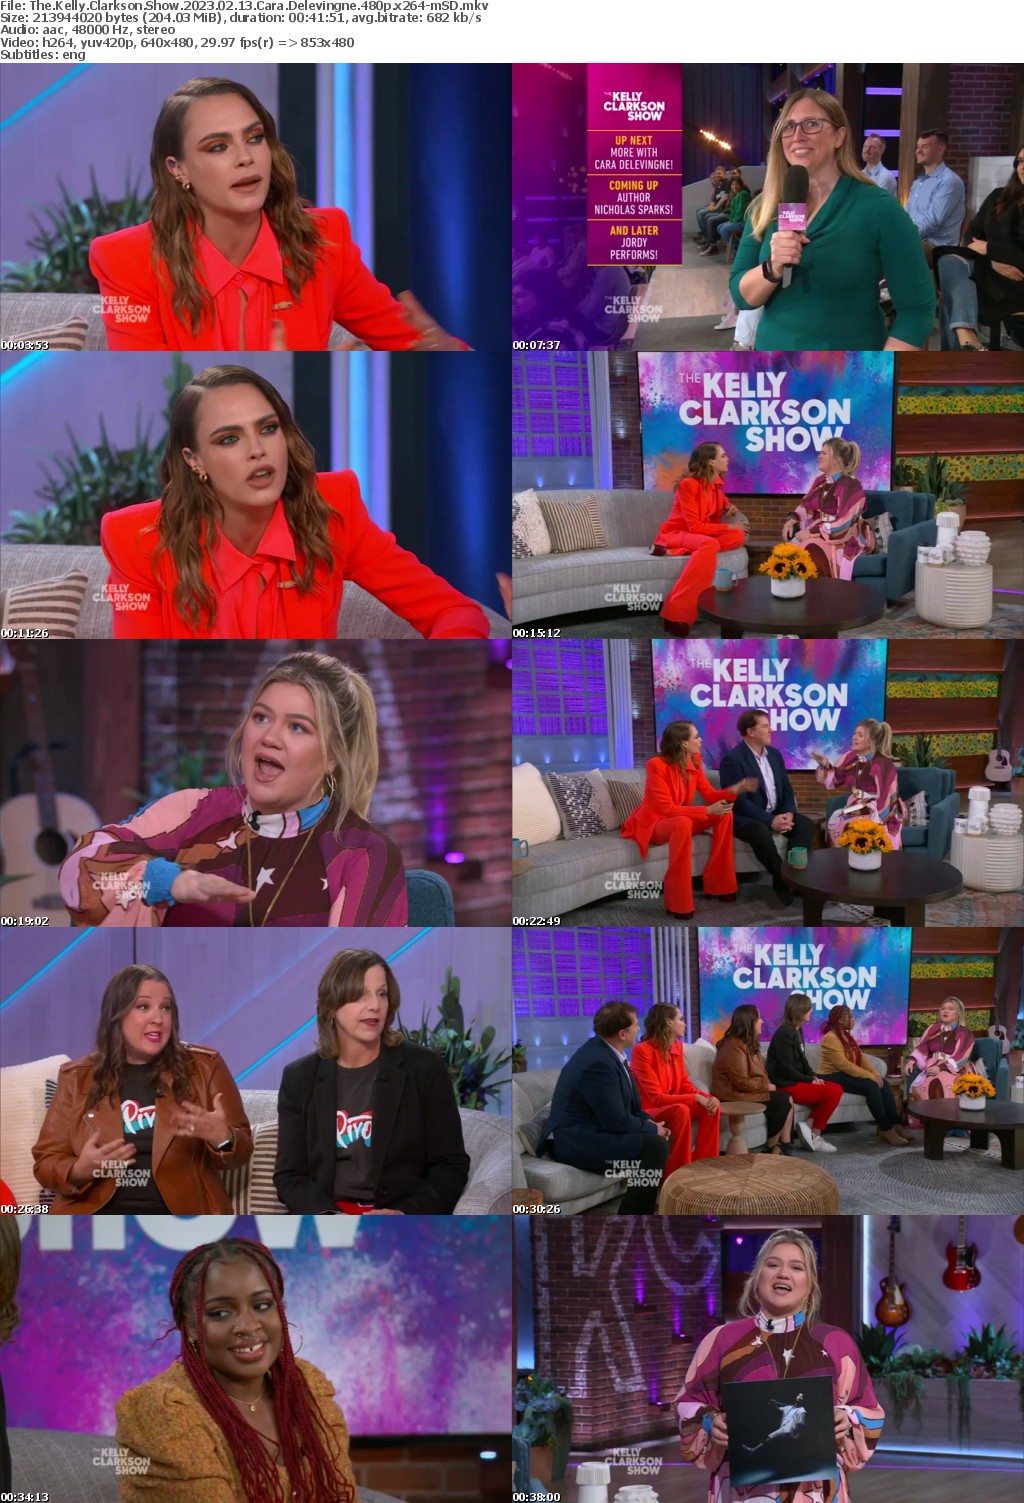 The Kelly Clarkson Show 2023 02 13 Cara Delevingne 480p x264-mSD